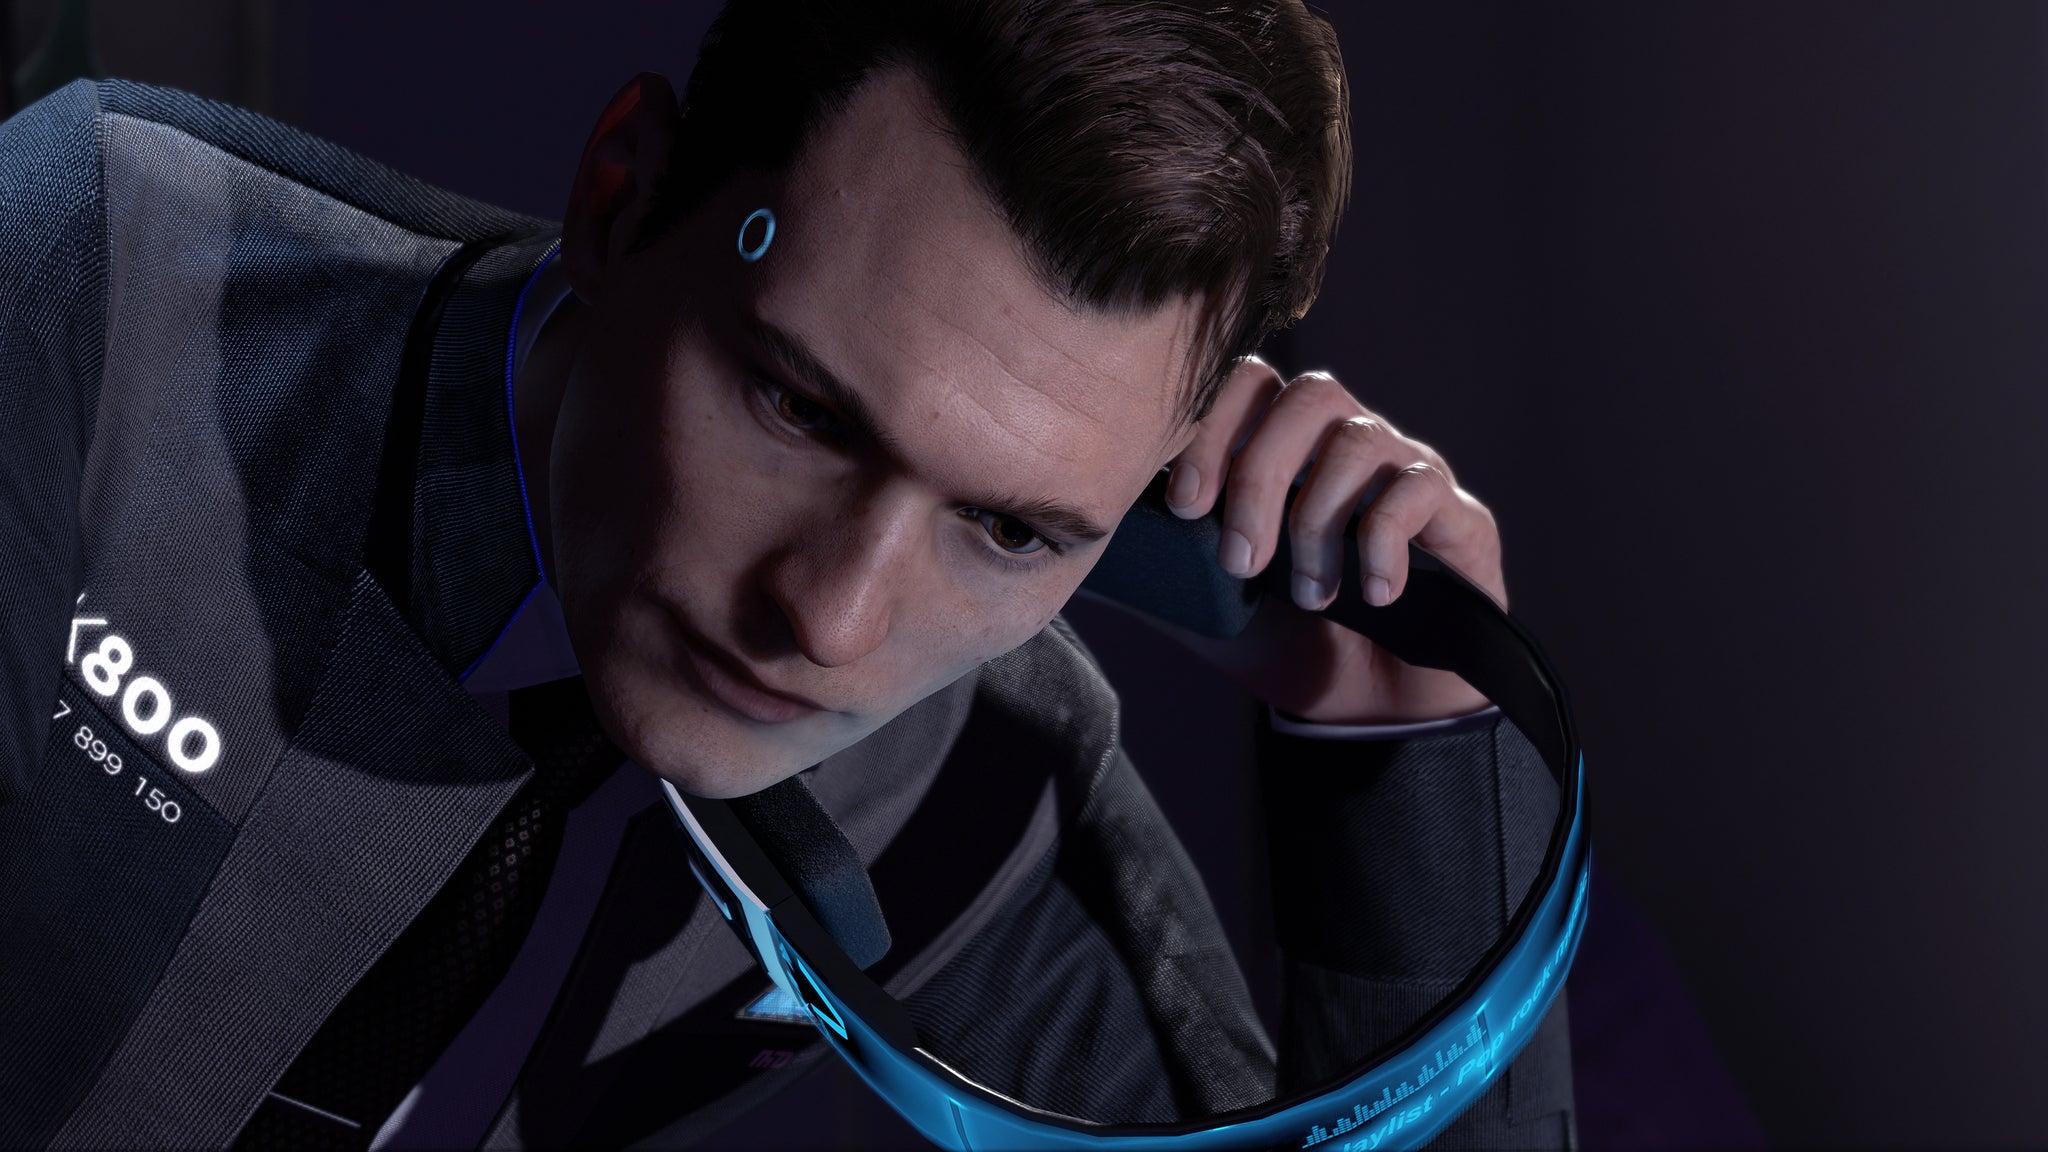 Detroit: Become Human [PlayStation 4] 